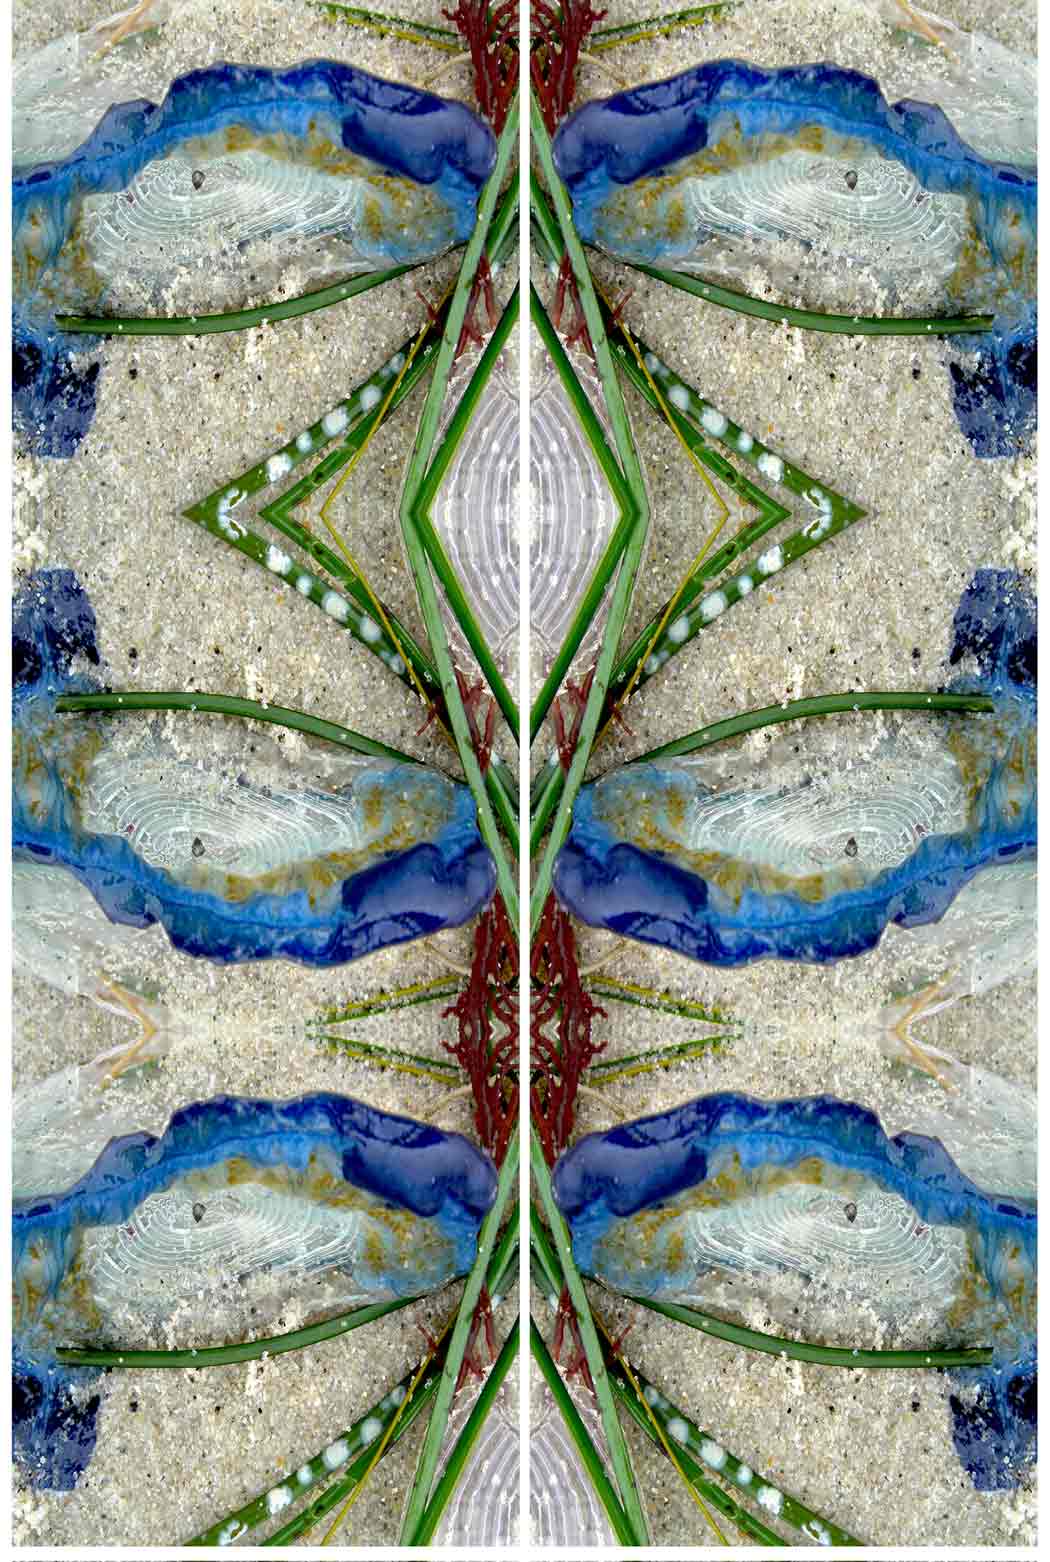  “Window”16x20 in., acrylic - ©2014 Maria Sky, All Rights Reserved  <p><em>Mirror image of seaweed</em><p>After photographing various seaweed, the photo was manipulated and mirrored to give this effect. The above photo is a closeup of the actual work.</p>